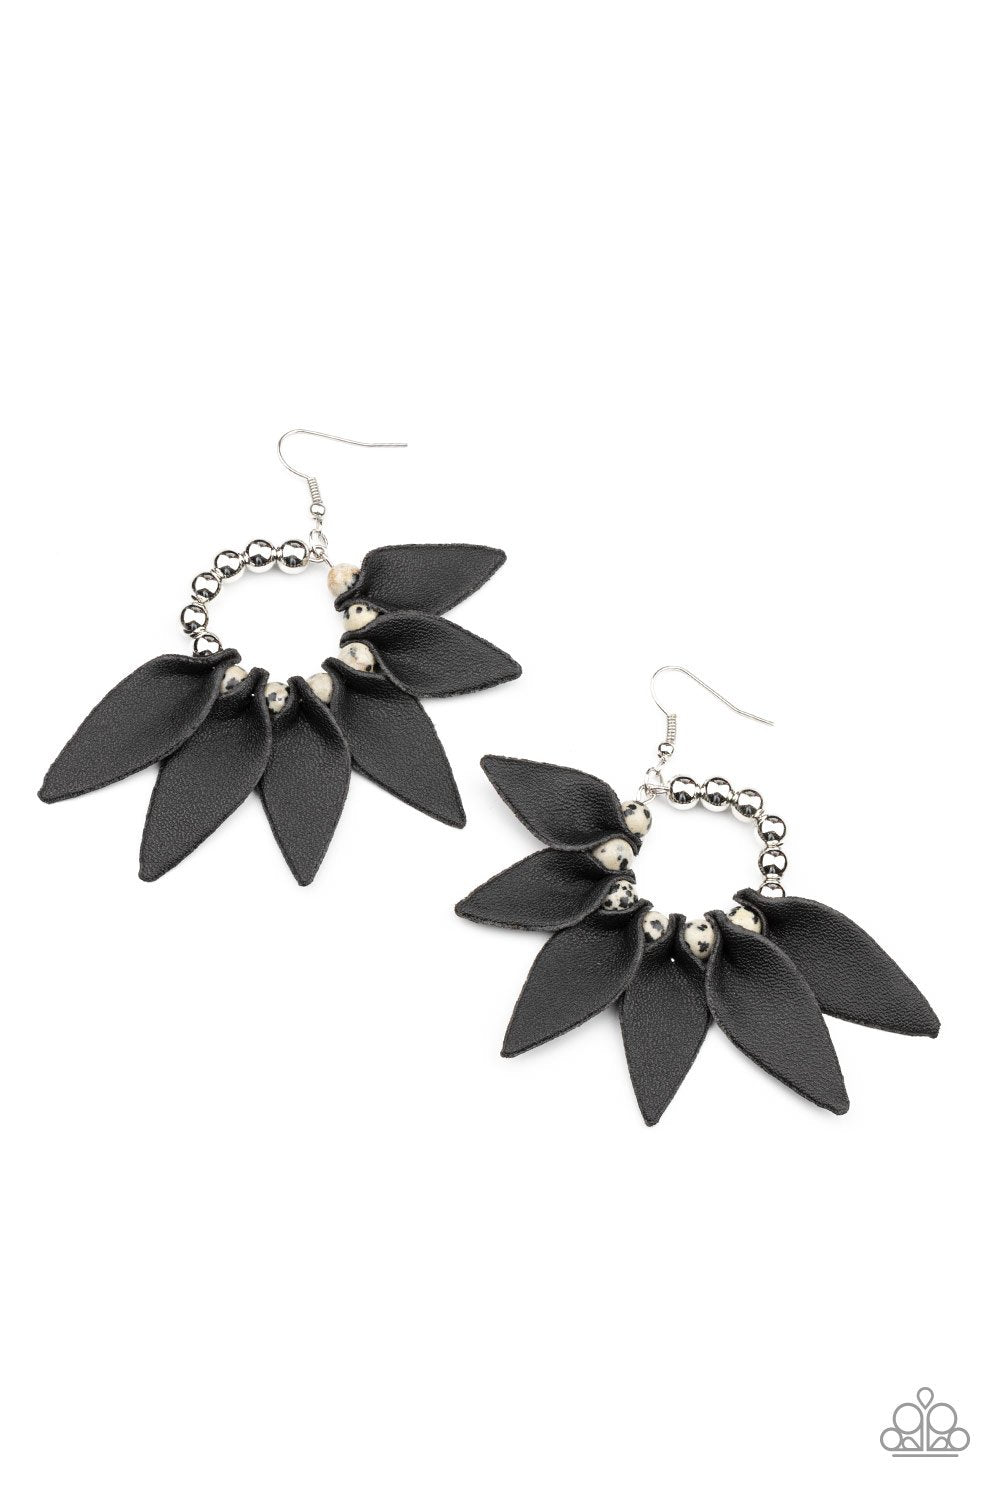 Flower Child Fever Black Leather Earrings - Paparazzi Accessories- lightbox - CarasShop.com - $5 Jewelry by Cara Jewels